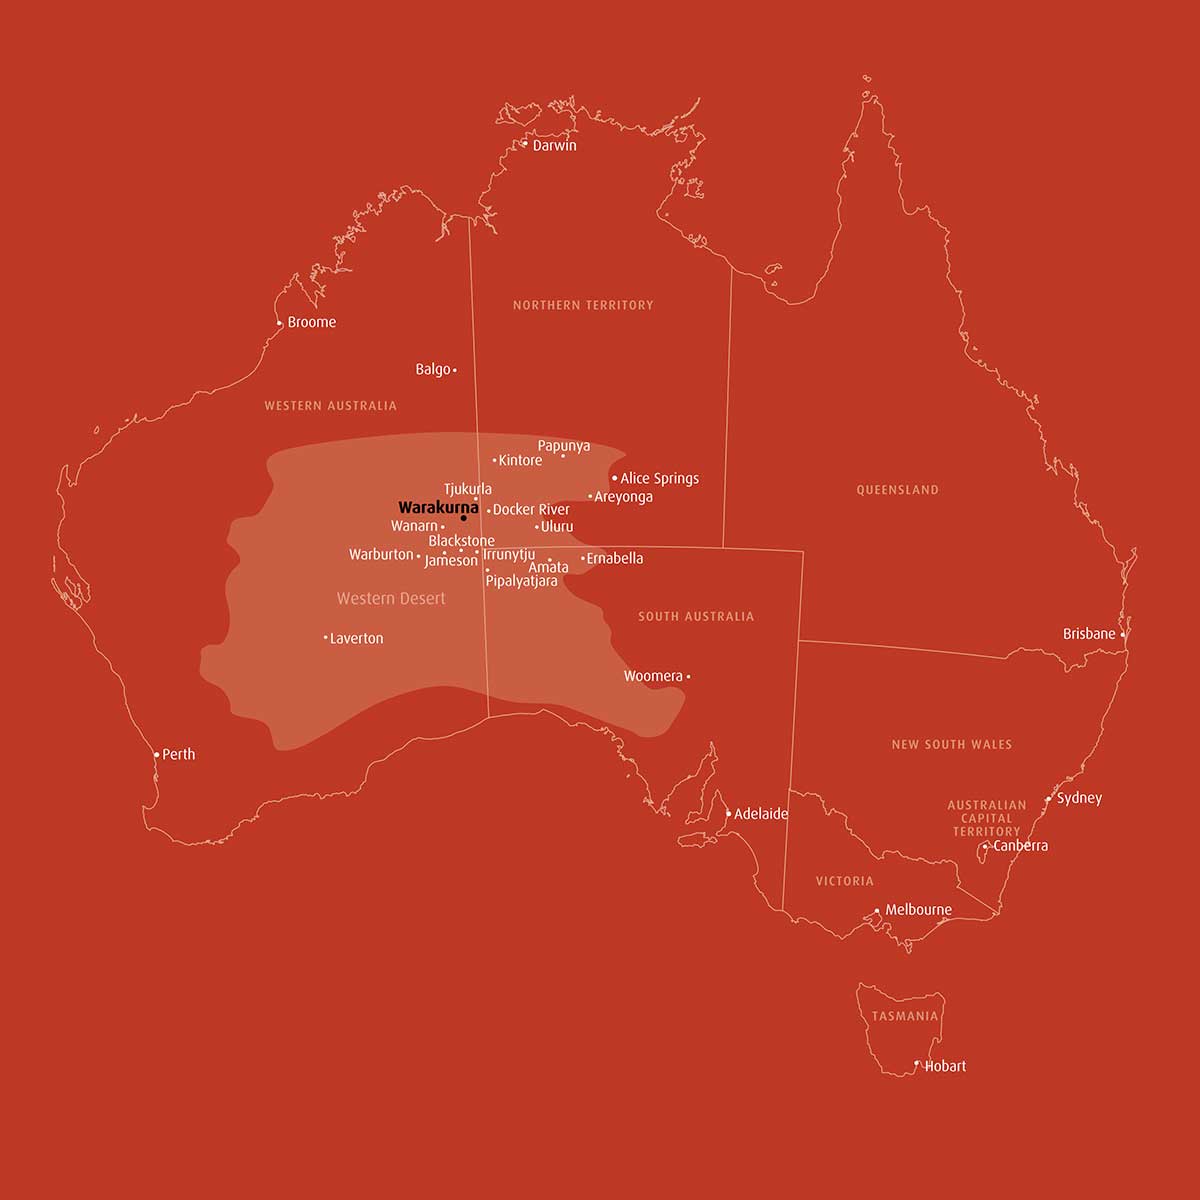 <p>This Western Desert community is situated near the meeting of the borders of Western Australia, South Australia and the Northern Territory. The Warakurna community lies near the foot of the spectacular Rawlinson Range, 300 kilometres west of Uluru (Ayers Rock).</p>
